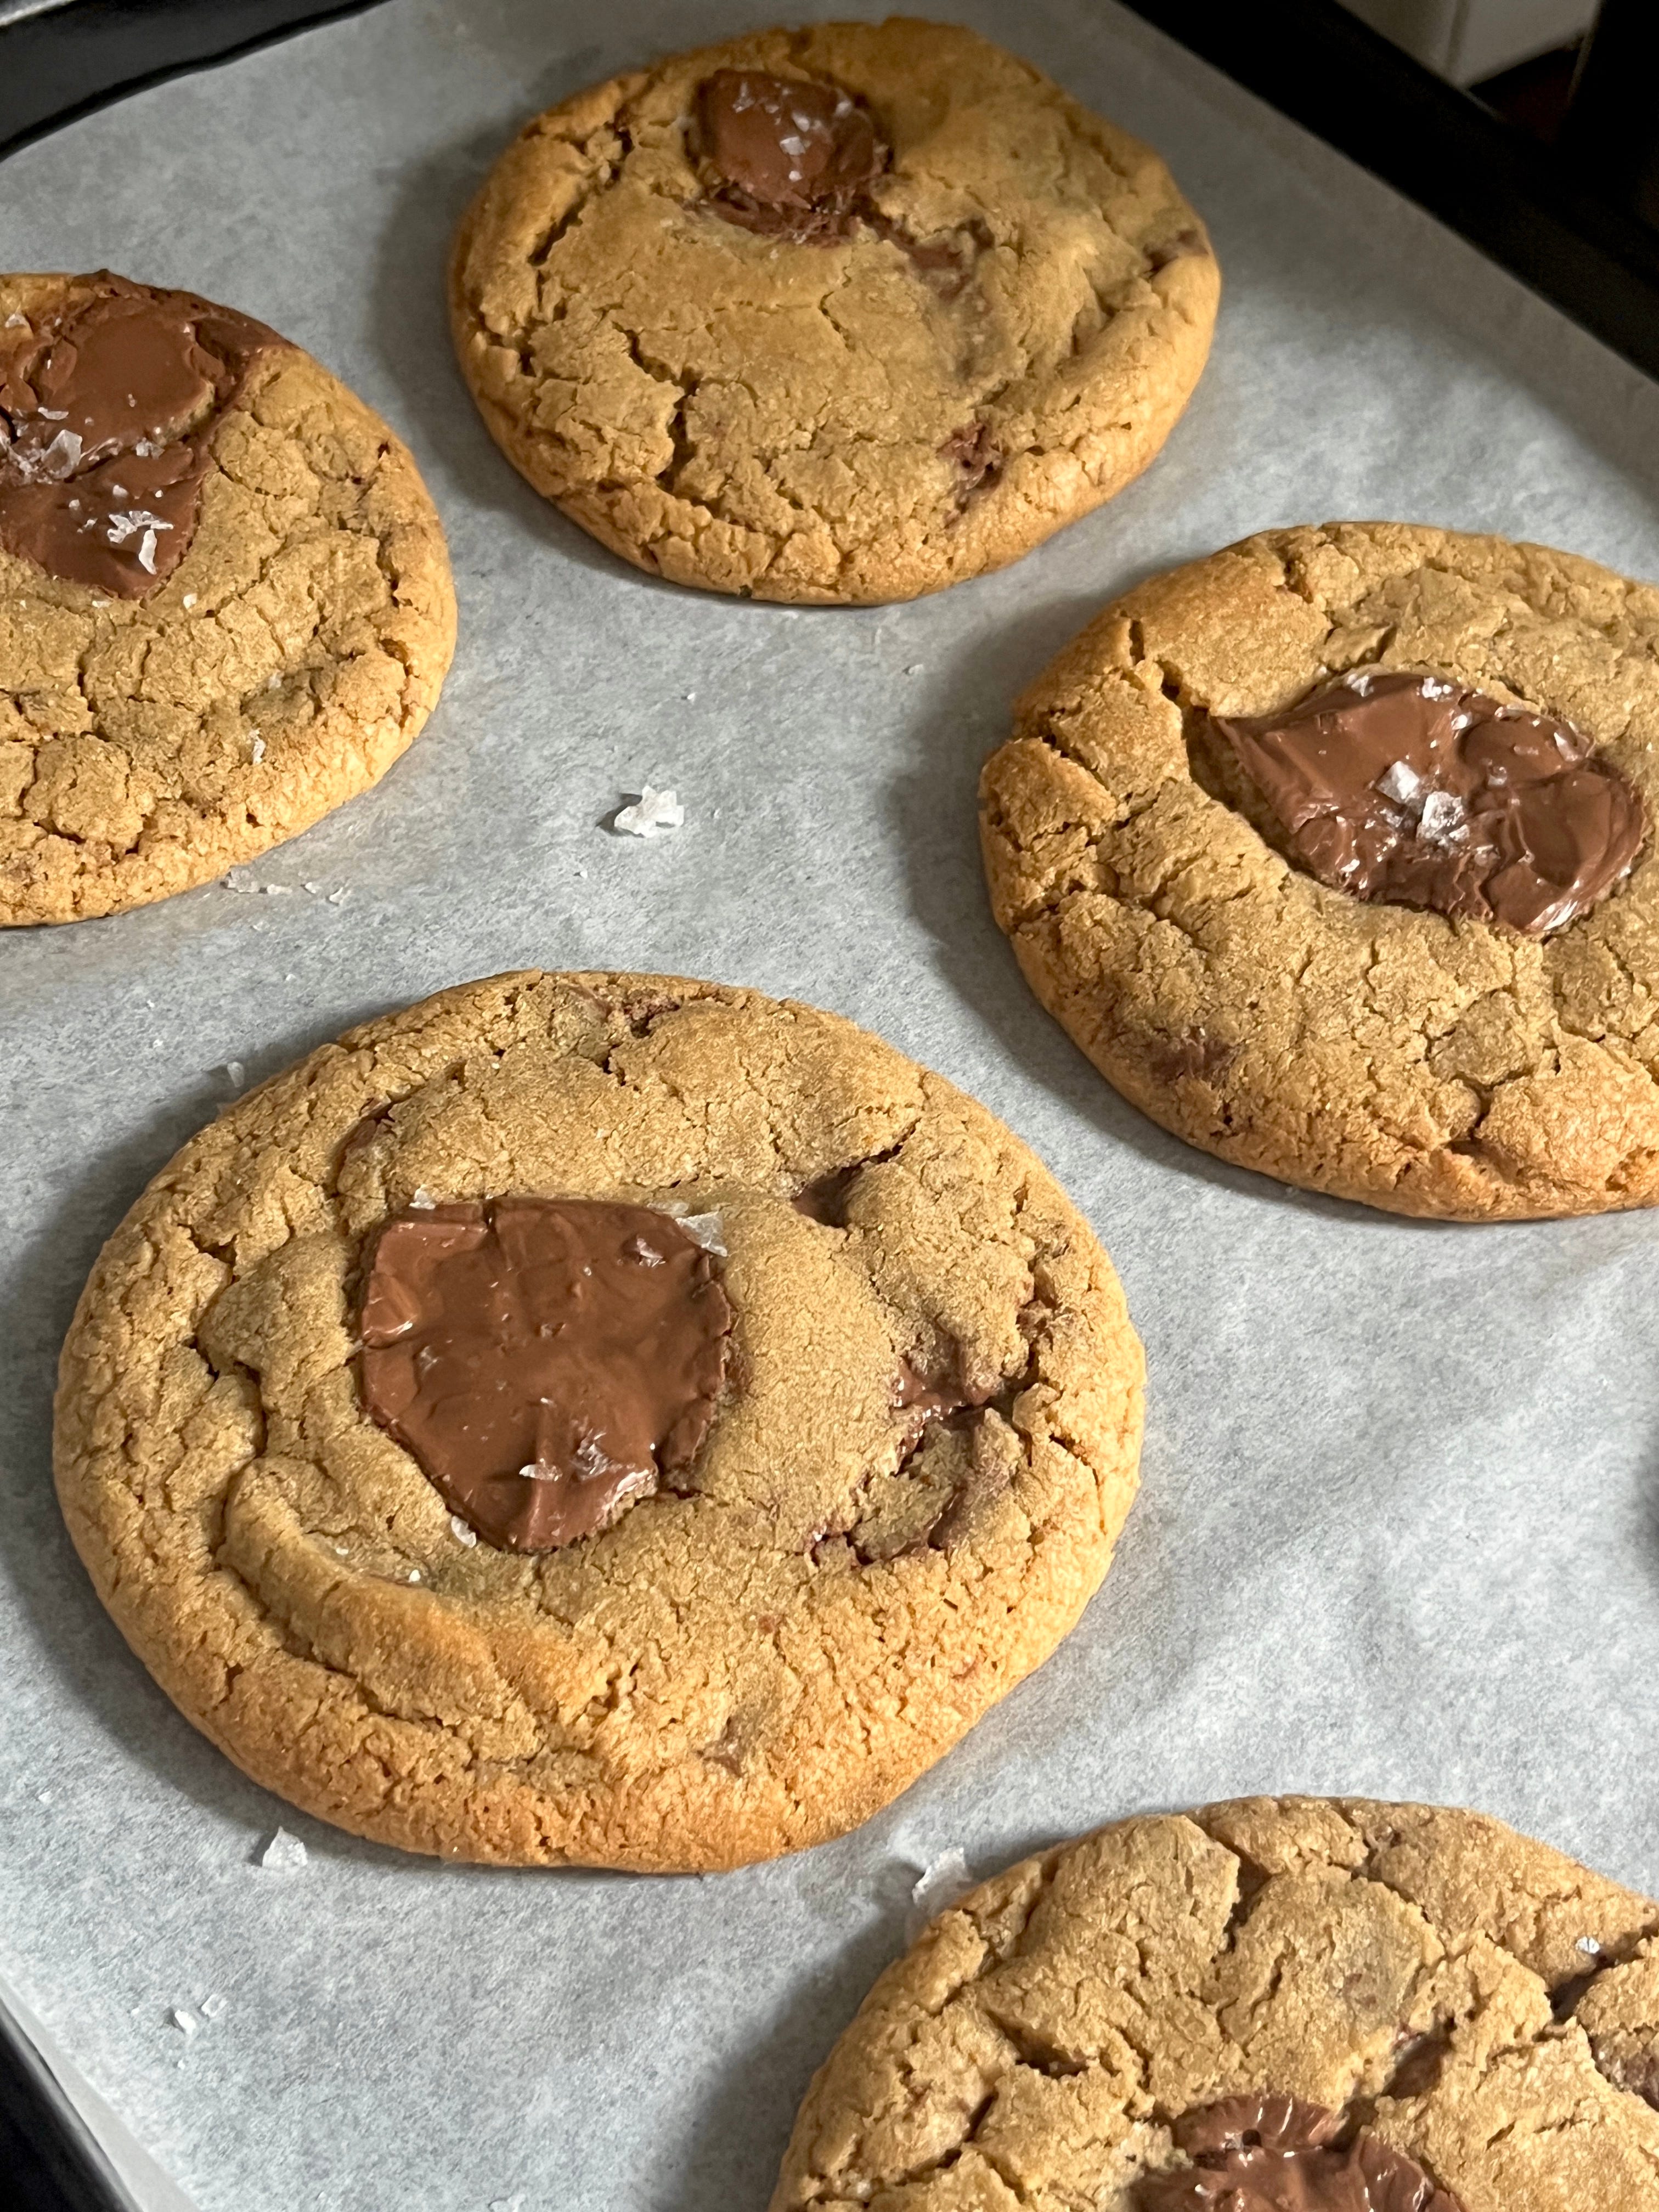 Kitchen Project #114: A Lesson In Cookies - by Nicola Lamb